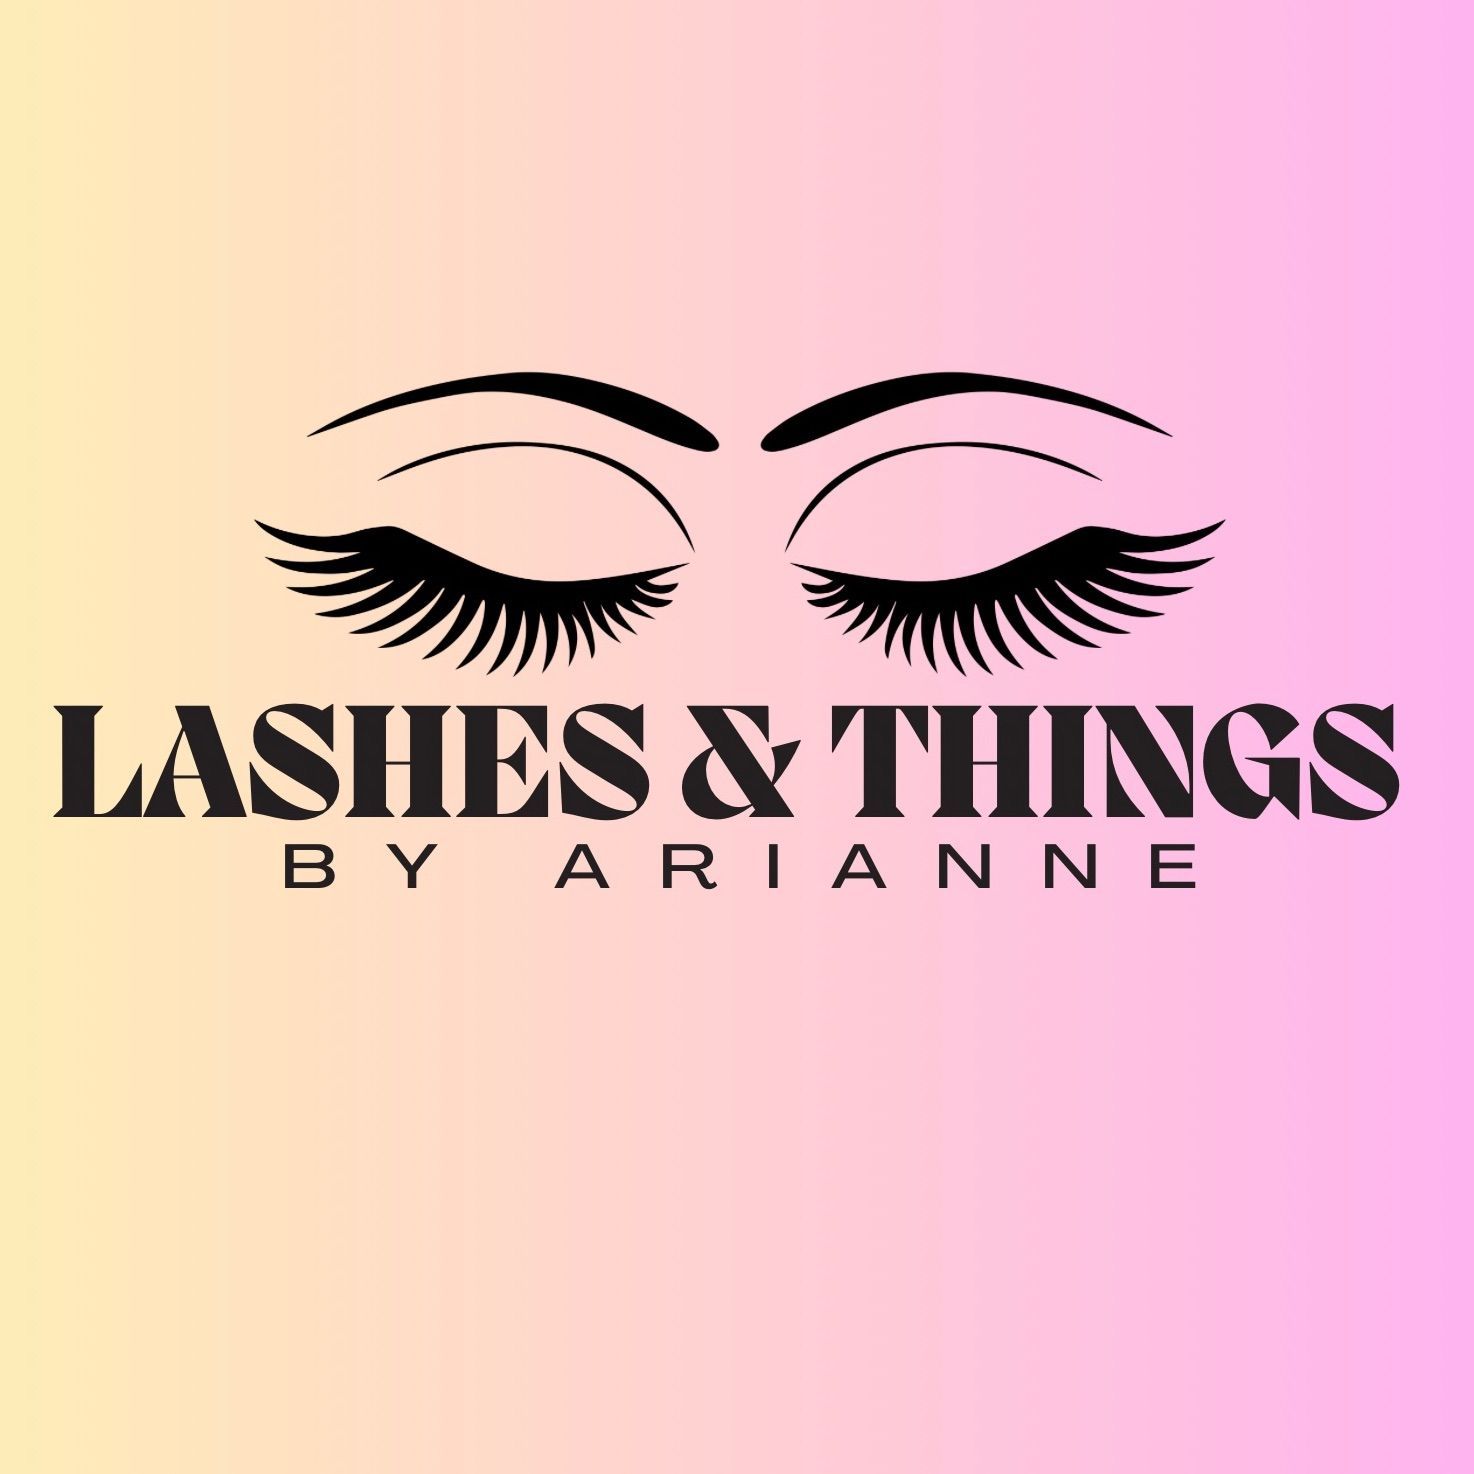 Lashes & Things by Arianne, Graham Road, BS23 1YA, Weston-super-Mare